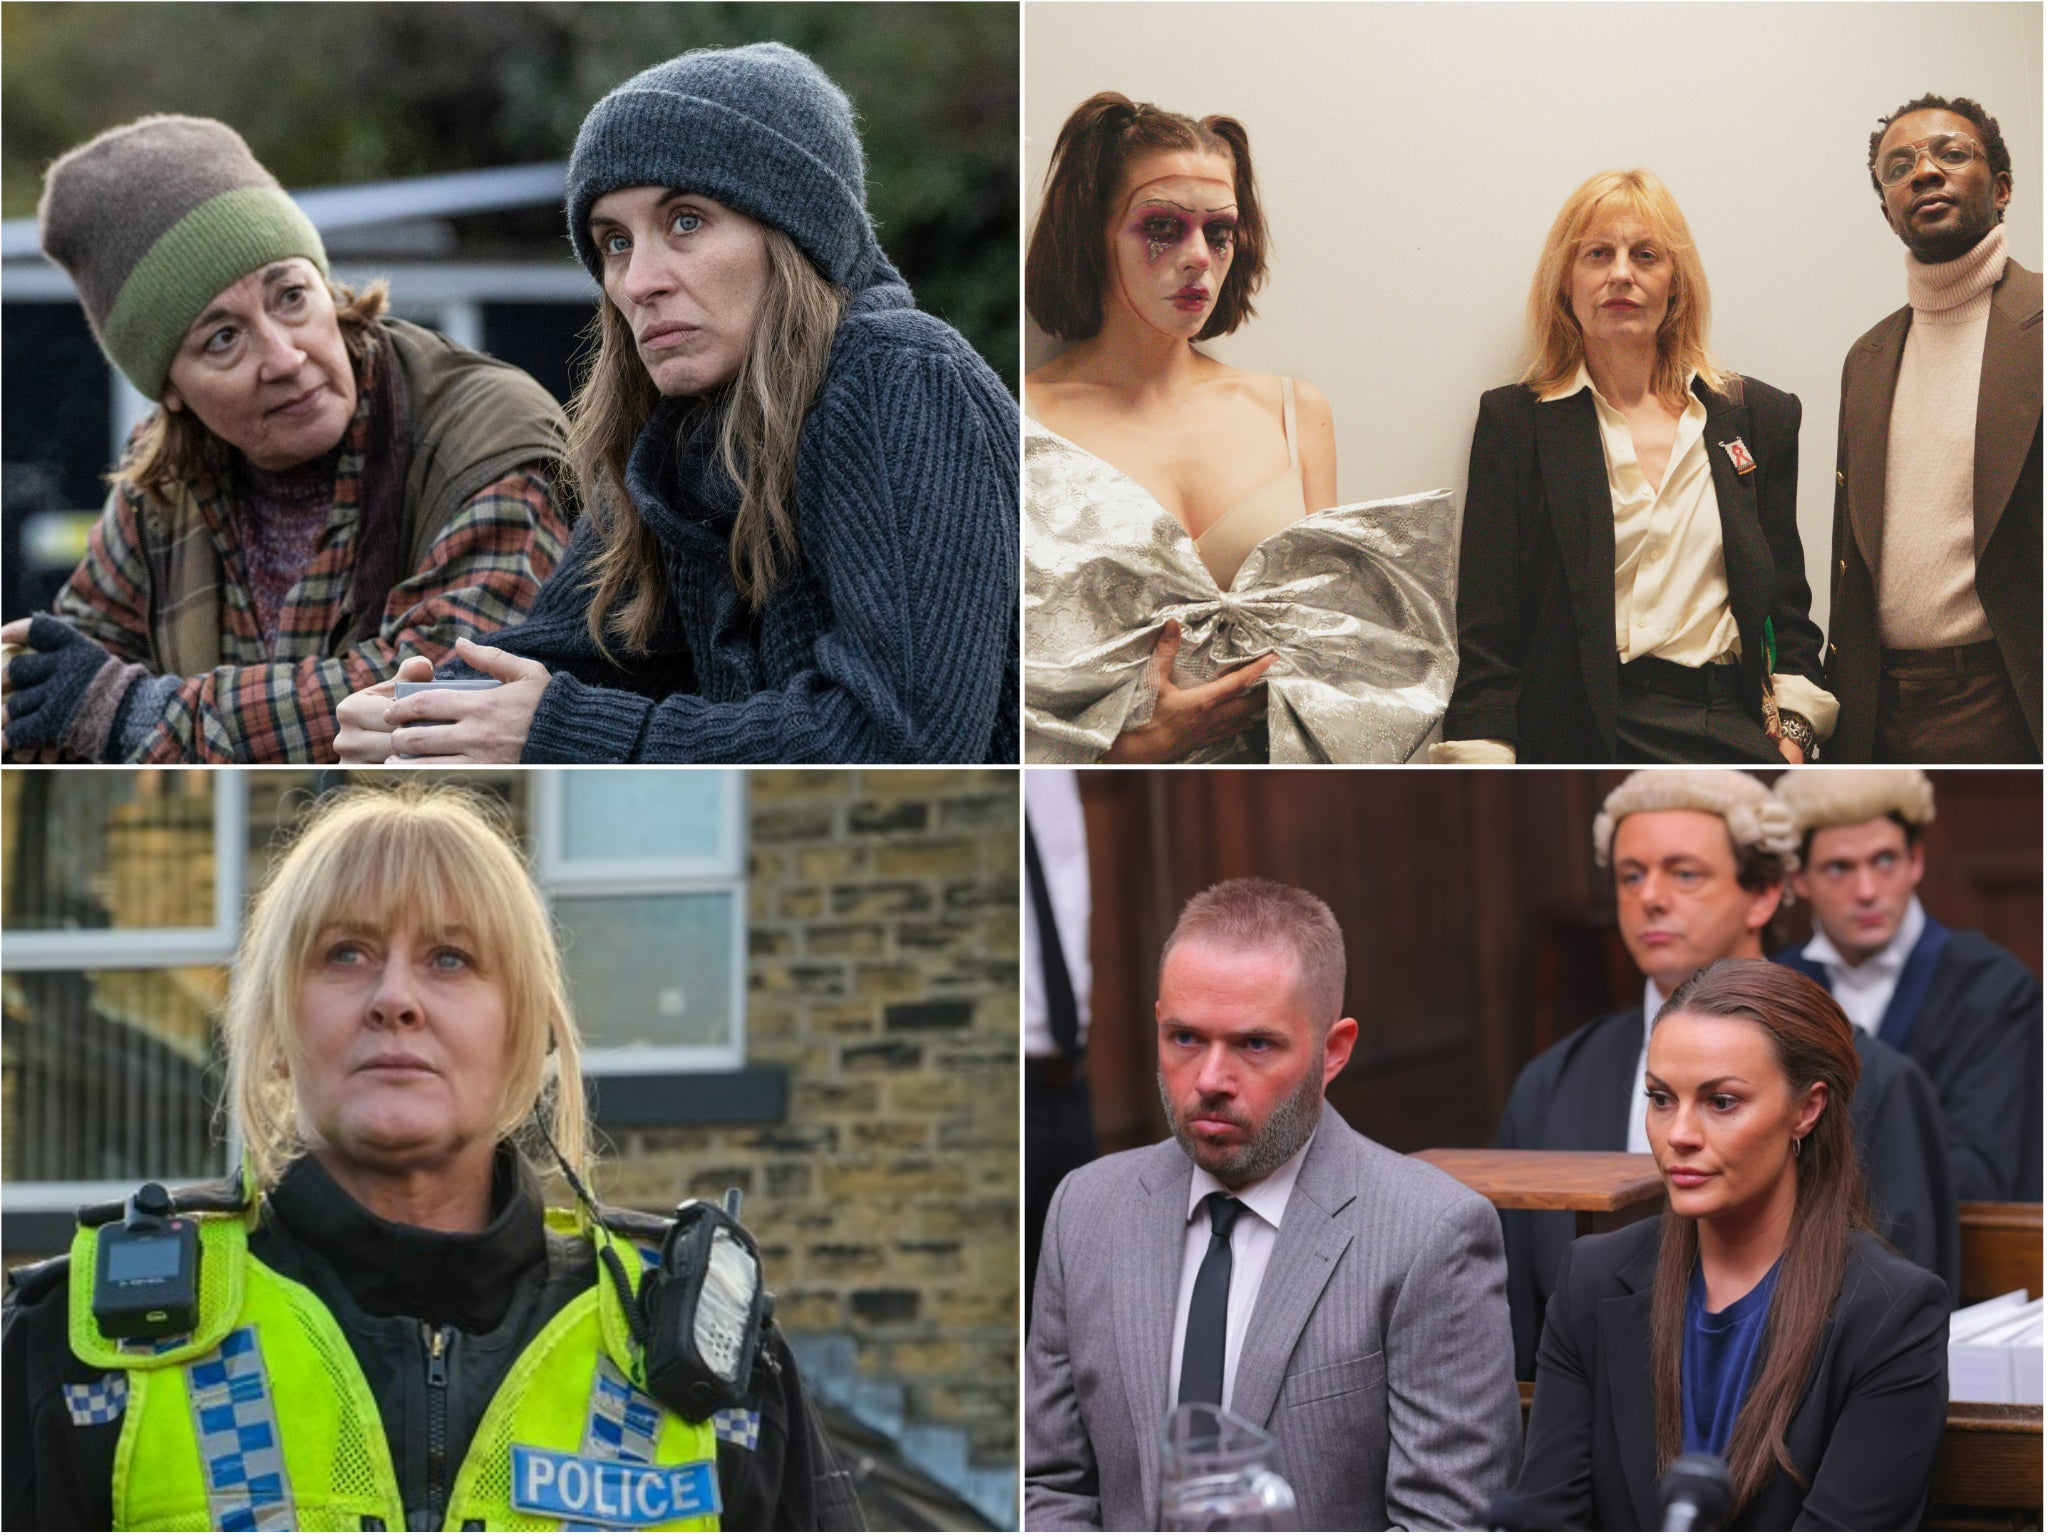 Clockwise from top left: ‘Without Sin’, ‘I Hate Suzie Too’, ‘Vardy v Rooney’, ‘Happy Valley’